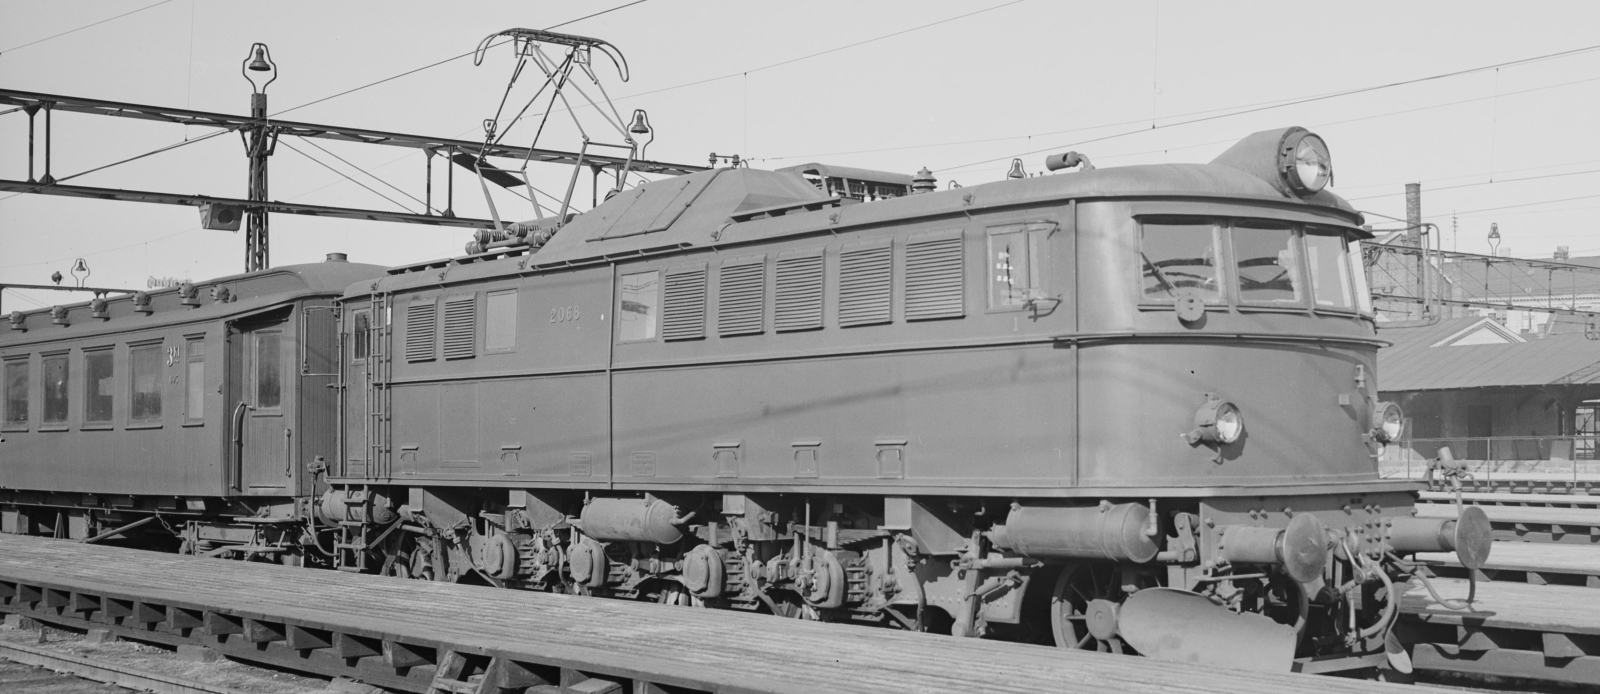 An El 8 in March 1948 with a passenger train